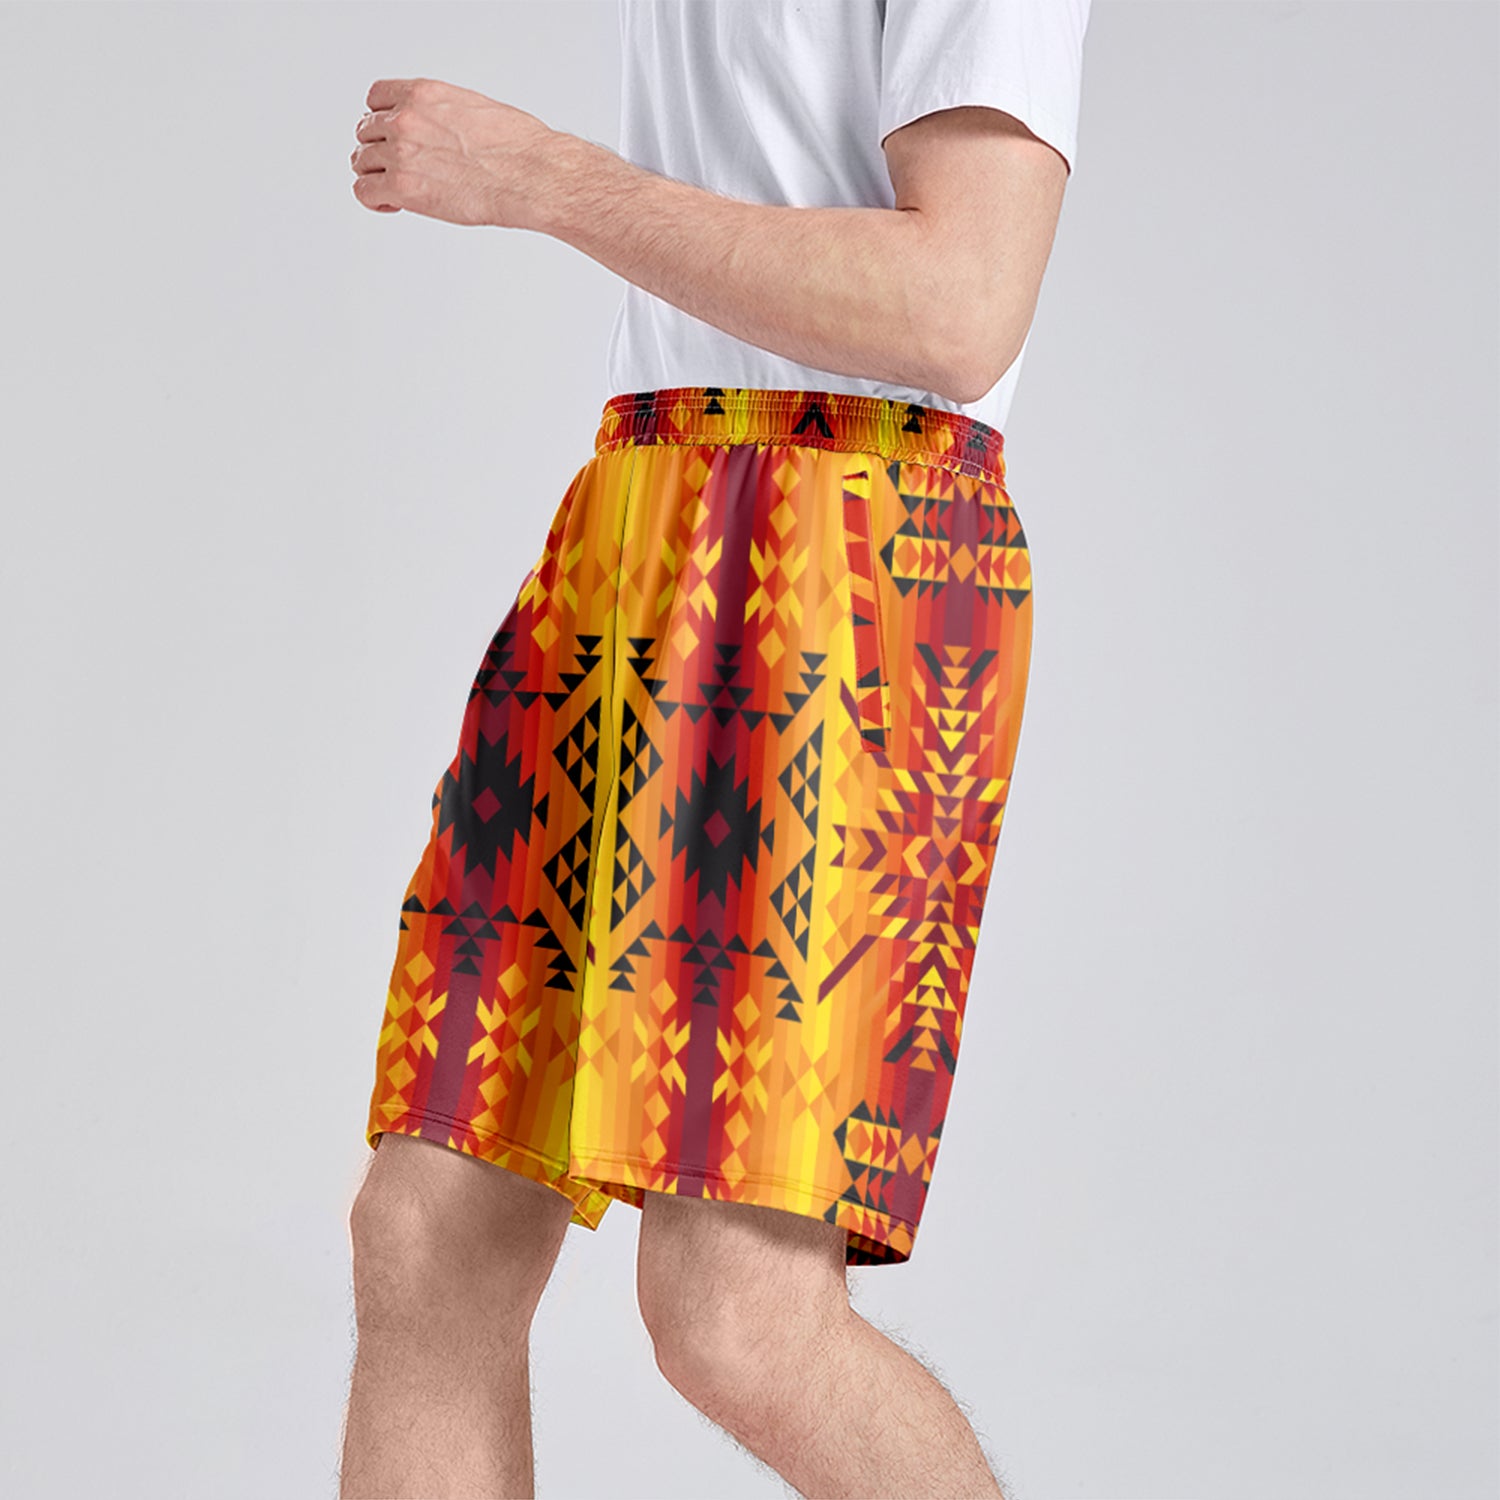 Desert Geo Yellow Athletic Shorts with Pockets